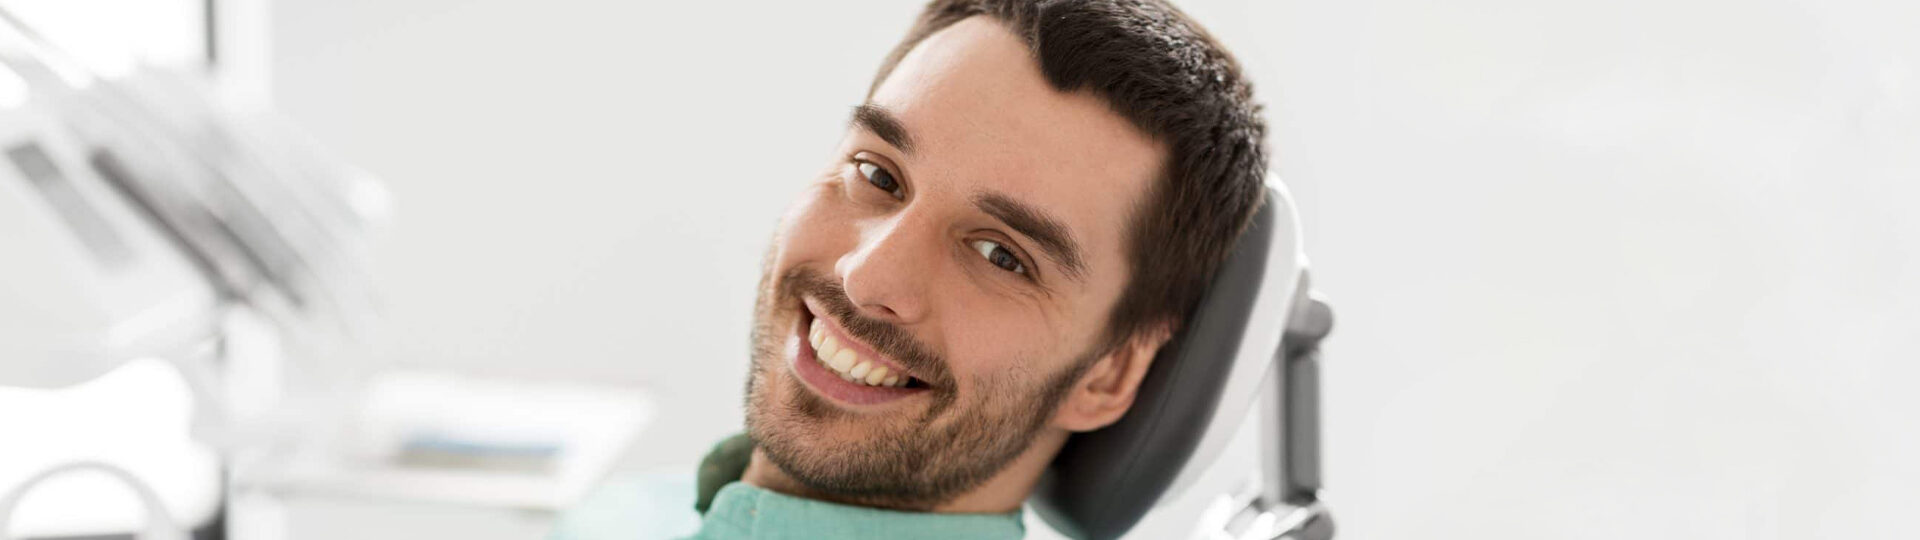 Is Root Canal Treatment Really Necessary?